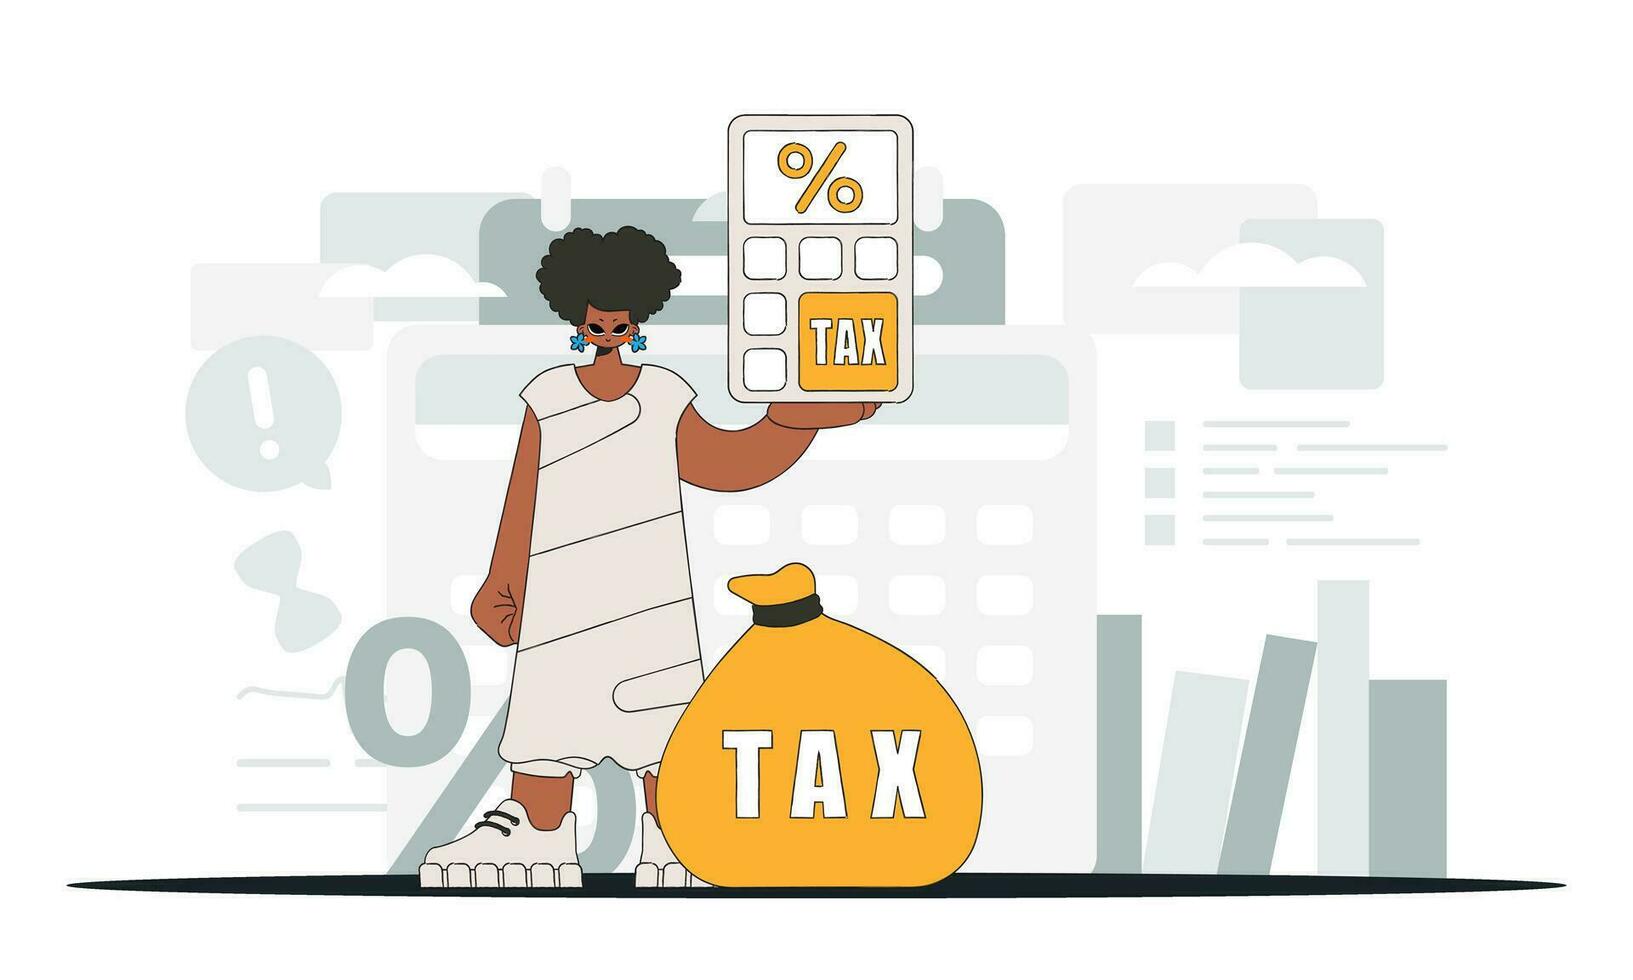 Gorgeous woman holding a calculator in her hand Illustration demonstrating the importance of paying taxes for the development of the economy. vector